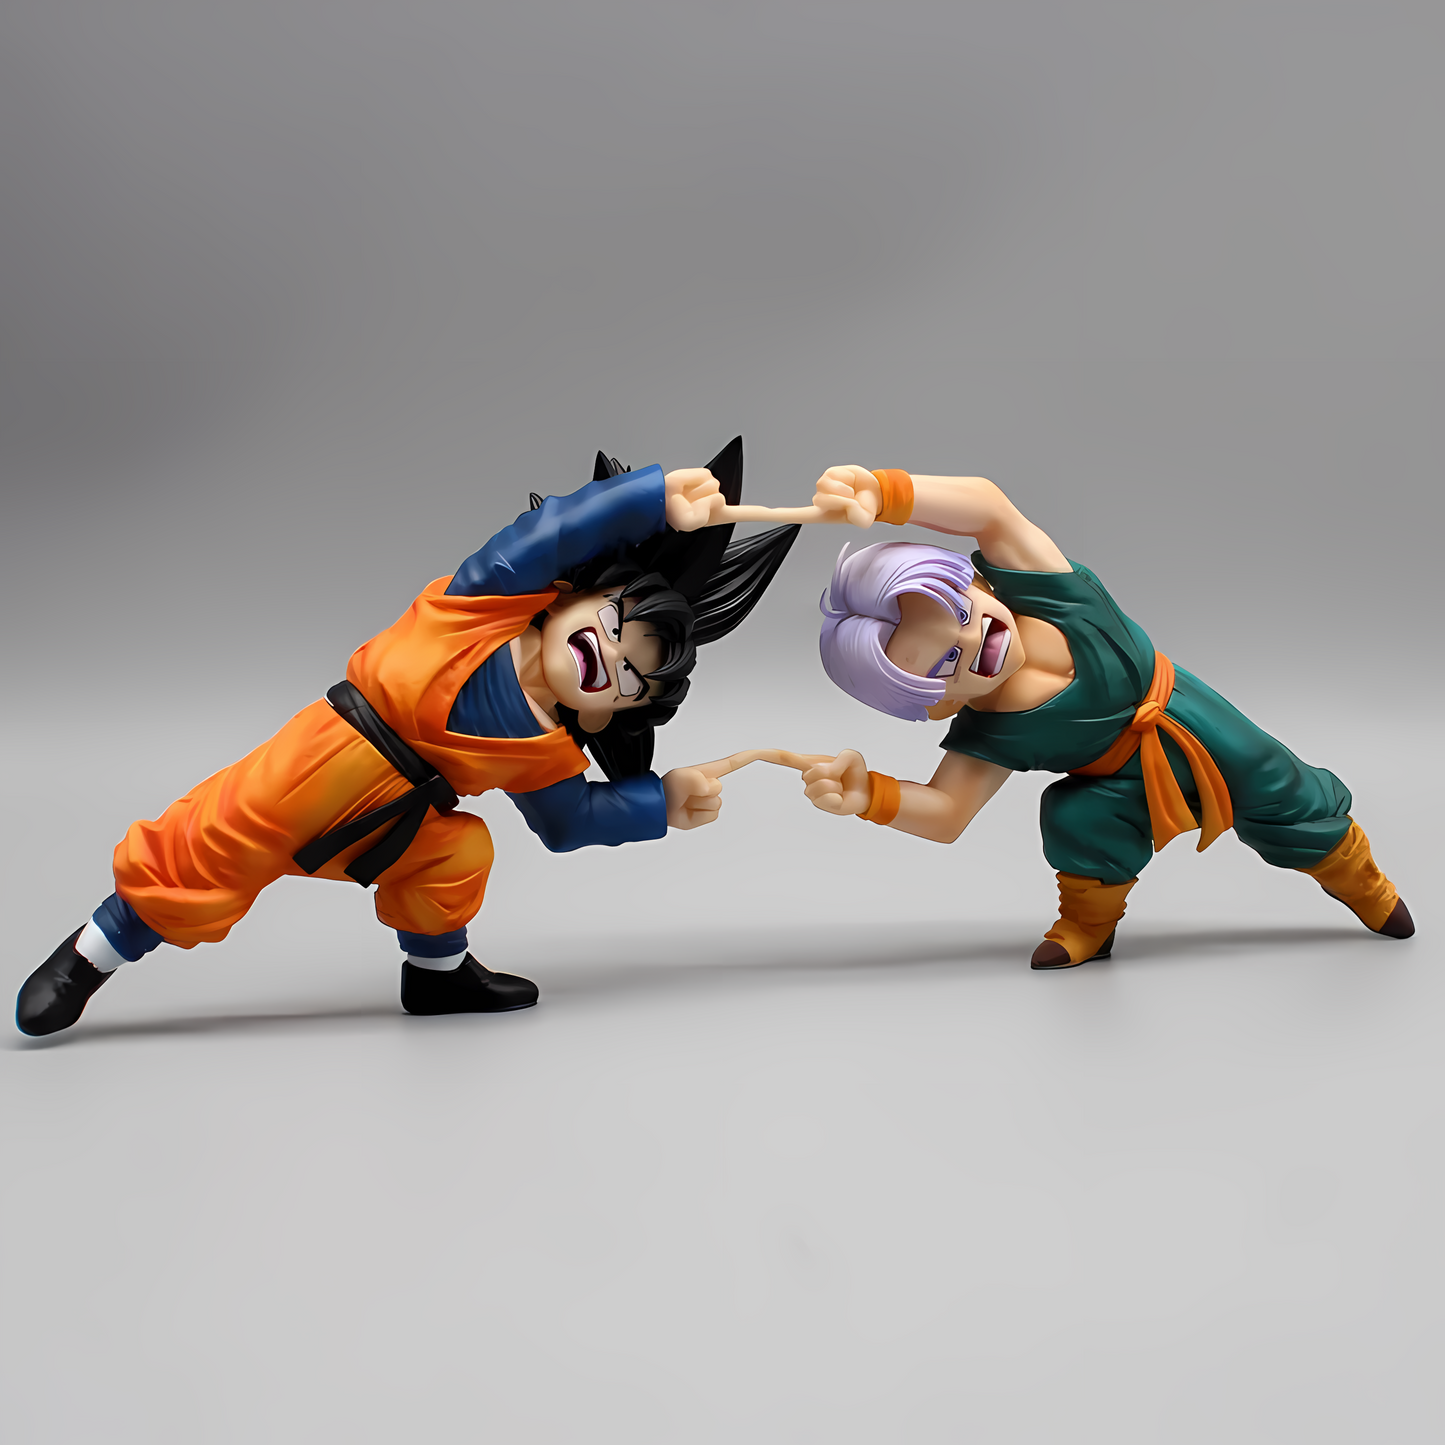 Dragon Ball figures of Goten and Trunks in mid-fusion, captured from the front on a plain grey background, highlighting the precision of their synchronization.